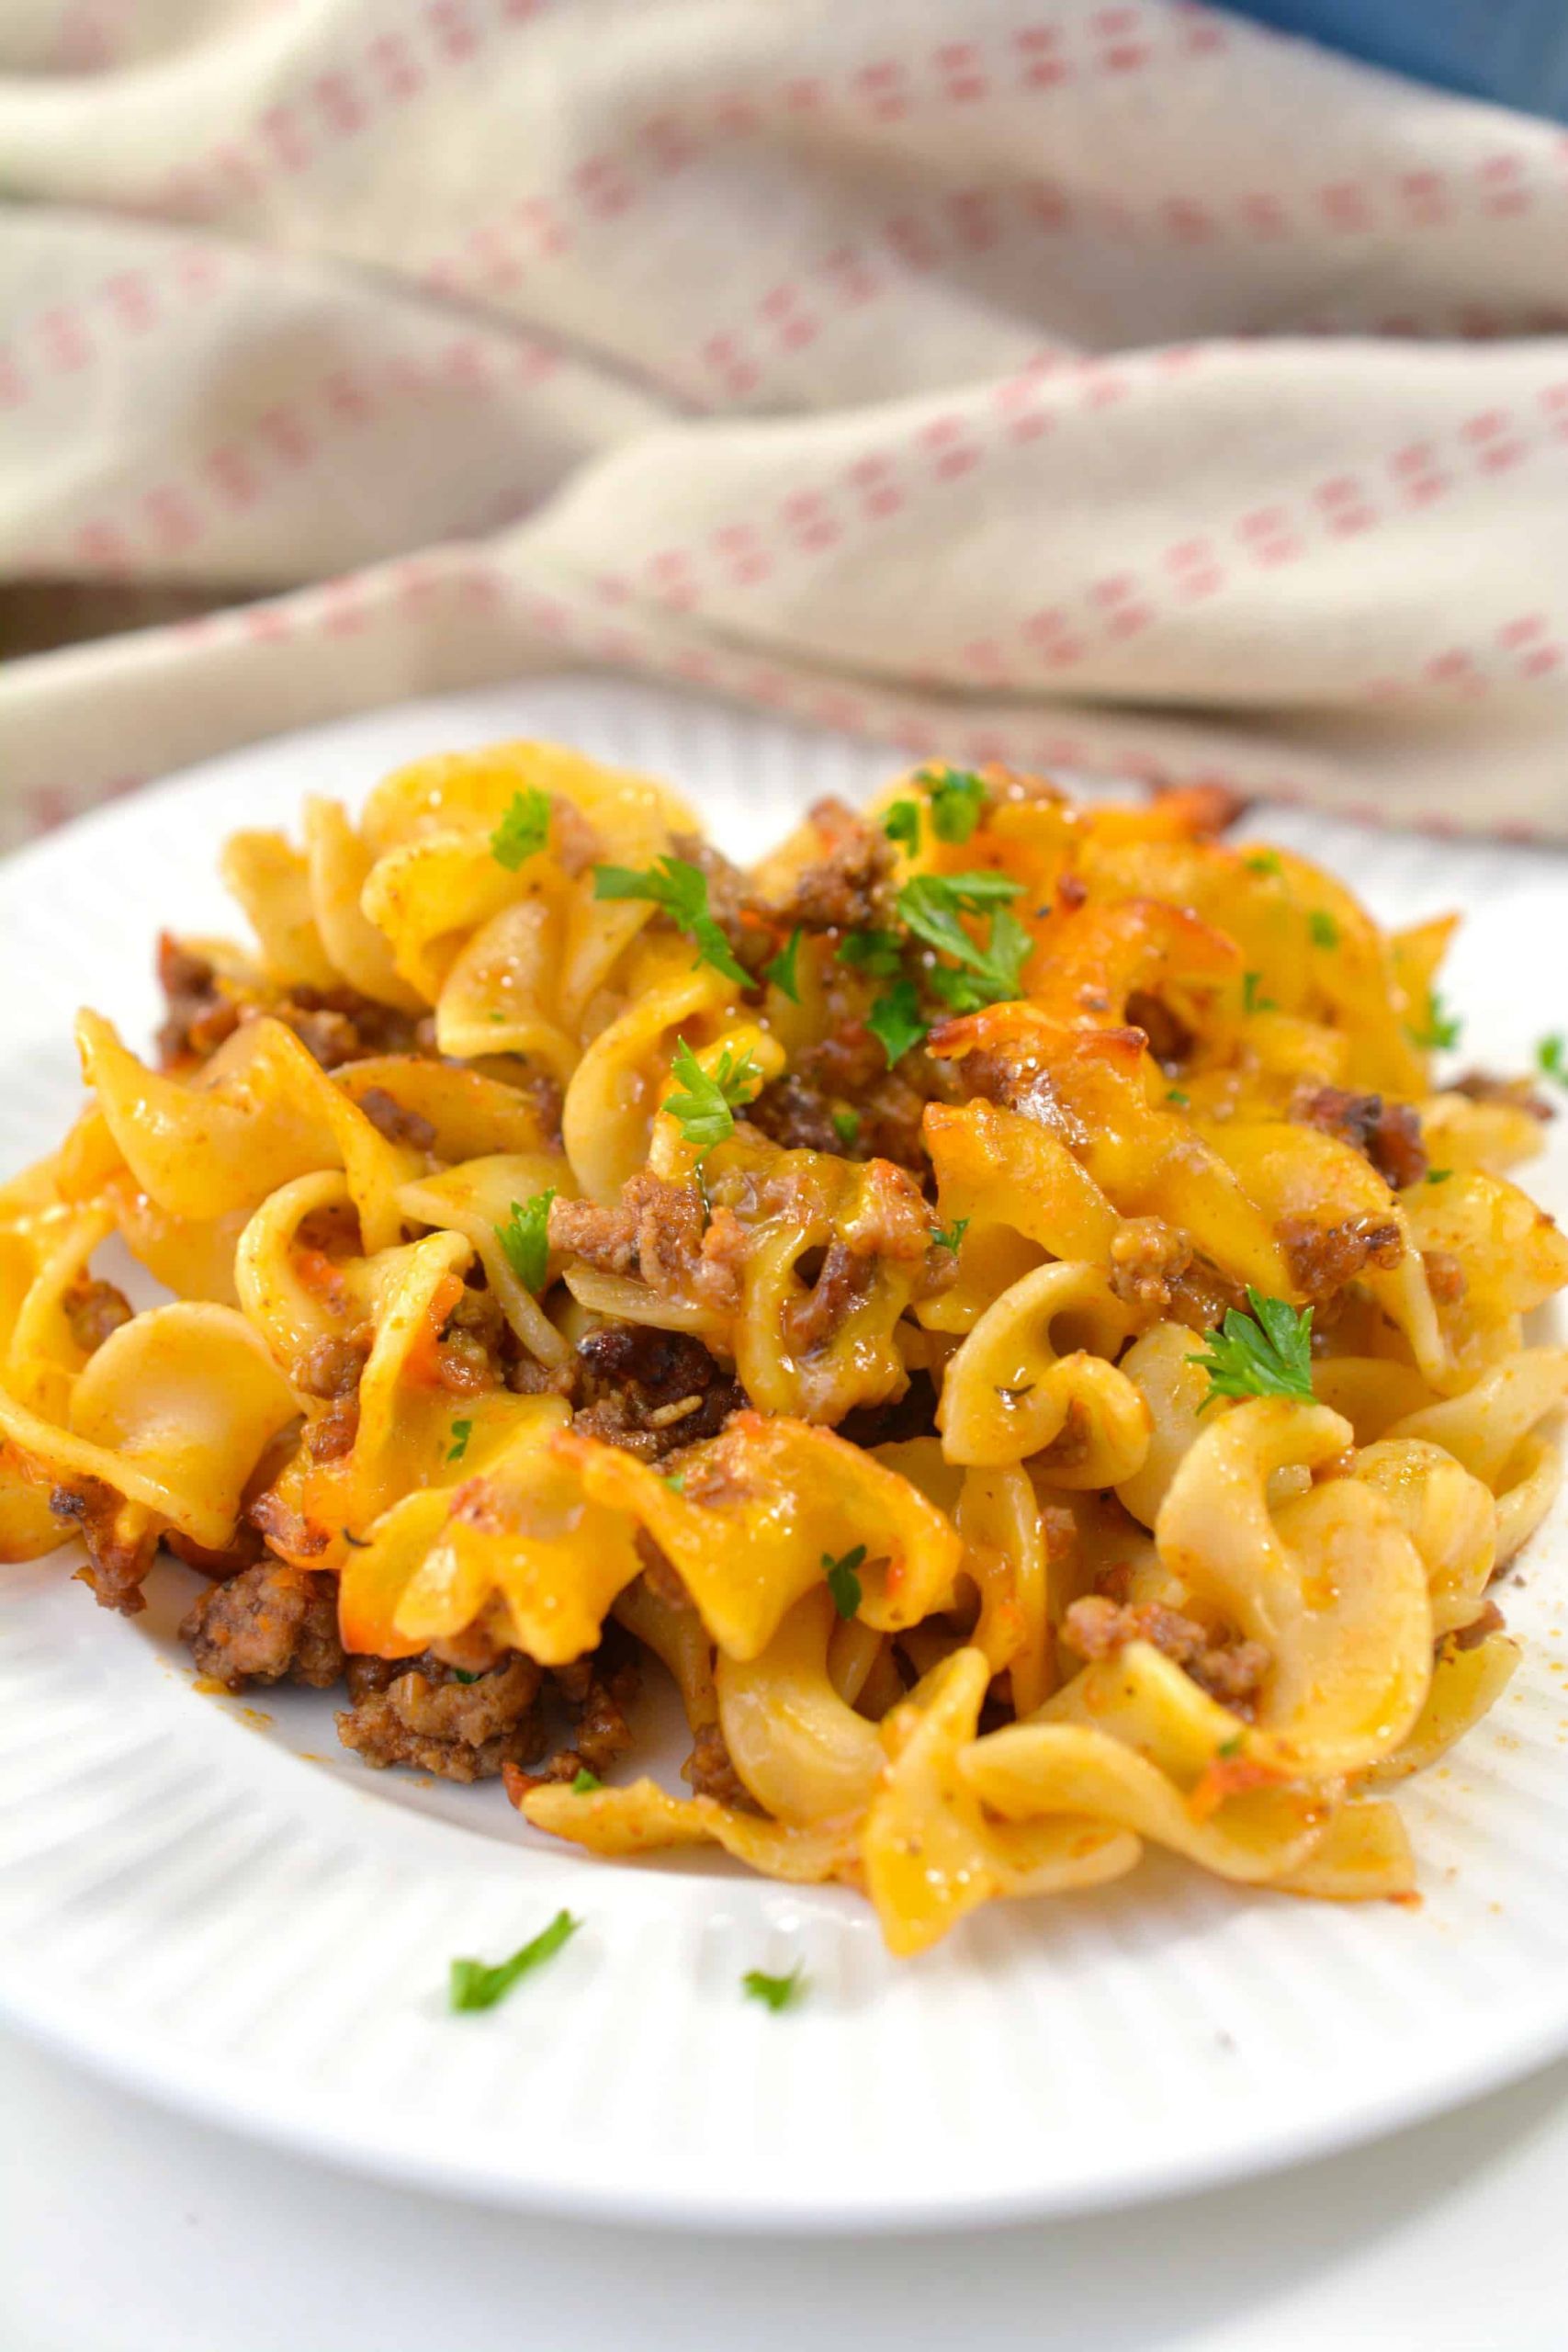 Egg Noodle Casserole with Ground Beef Luxury Beef Noodle Casserole Easy Egg Noodle Casserole Recipe